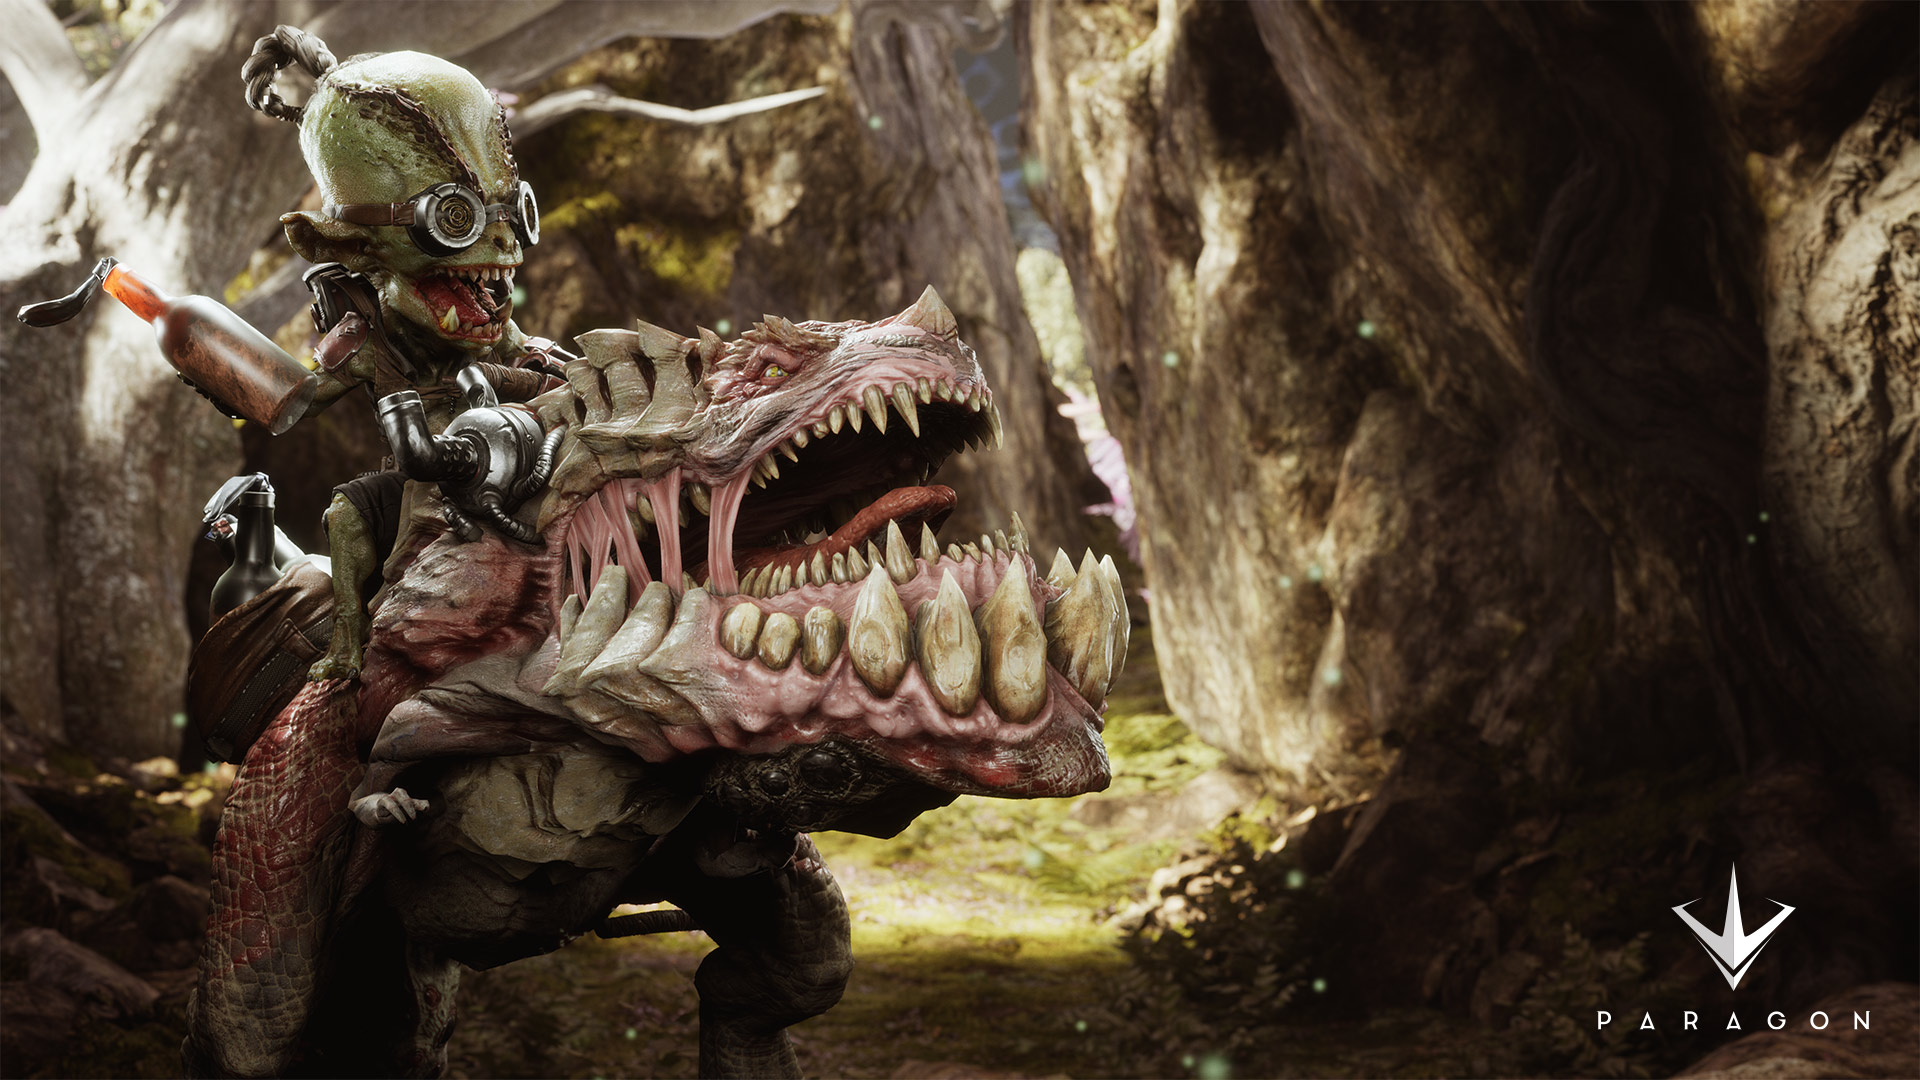 Paragon Hd Wallpaper - Paragon Iggy And Scorch , HD Wallpaper & Backgrounds